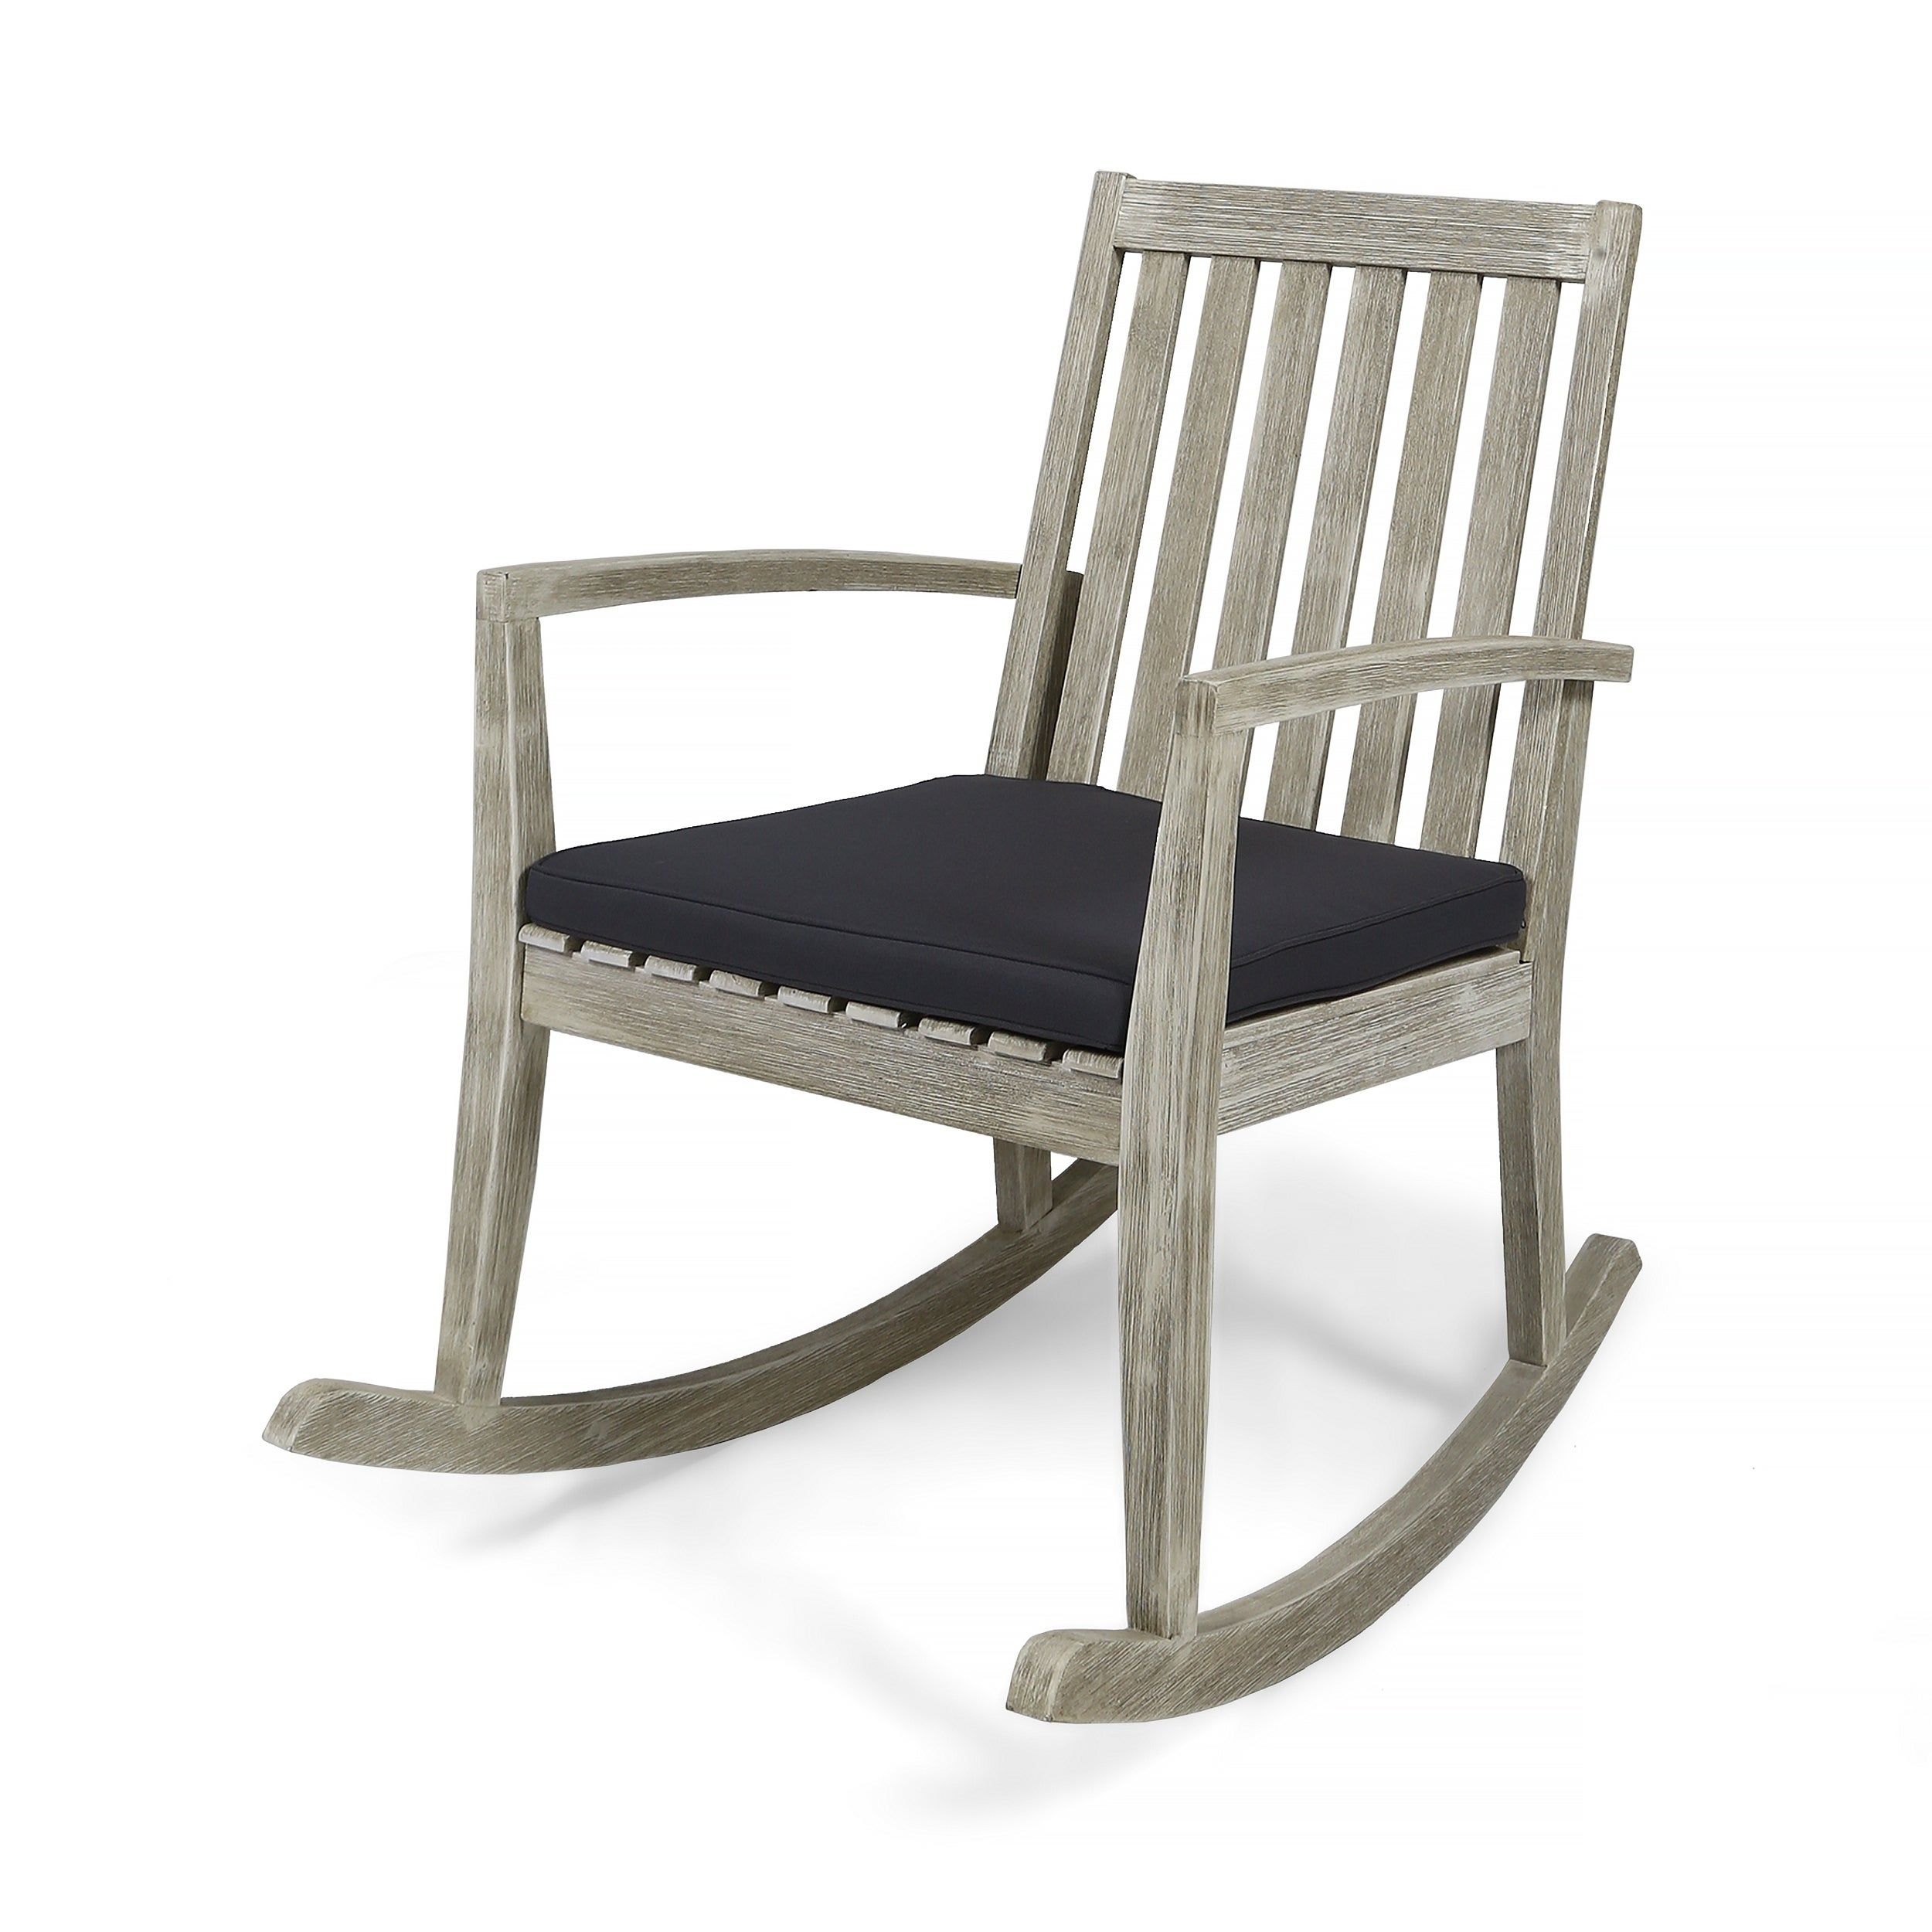 Buy Rocking Chairs, Traditional Living Room Chairs Online At Throughout Judson Traditional Rocking Chairs (View 2 of 20)